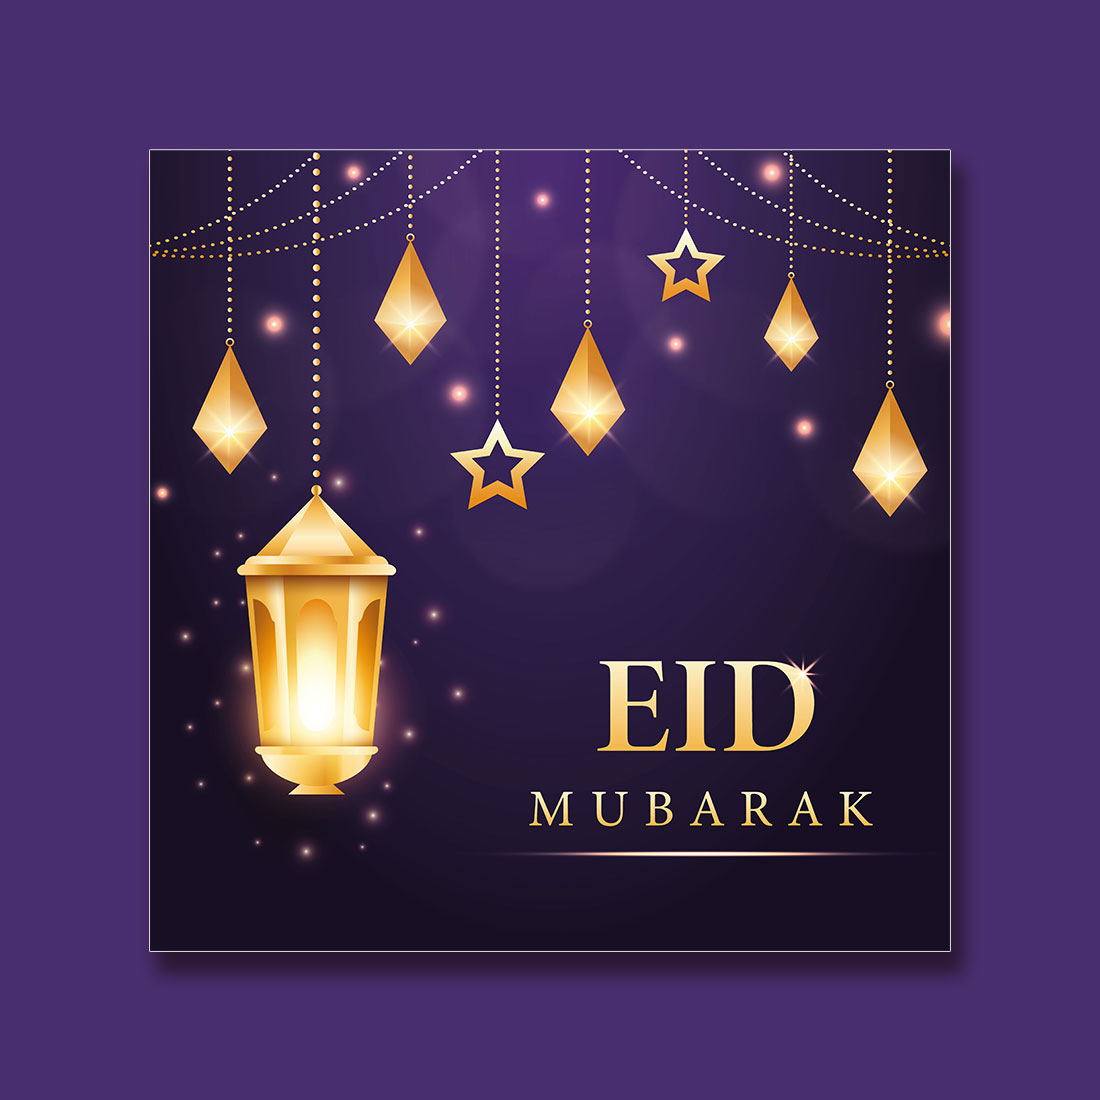 Eid Mubarak greeting card design with Islamic background preview image.